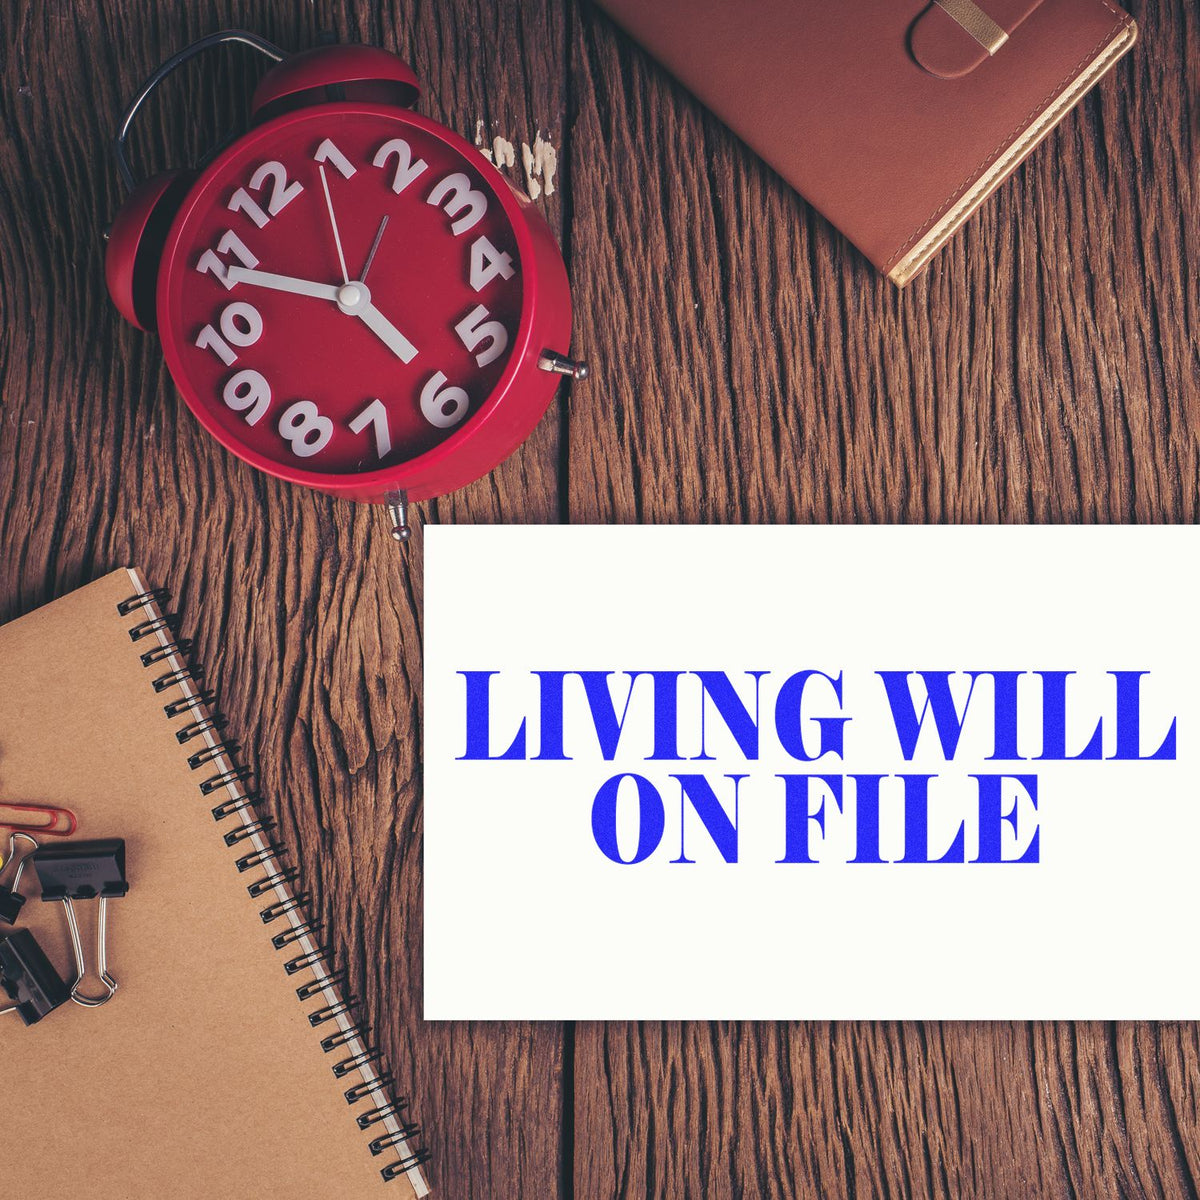 Large Living Will On File Rubber Stamp In Use Photo